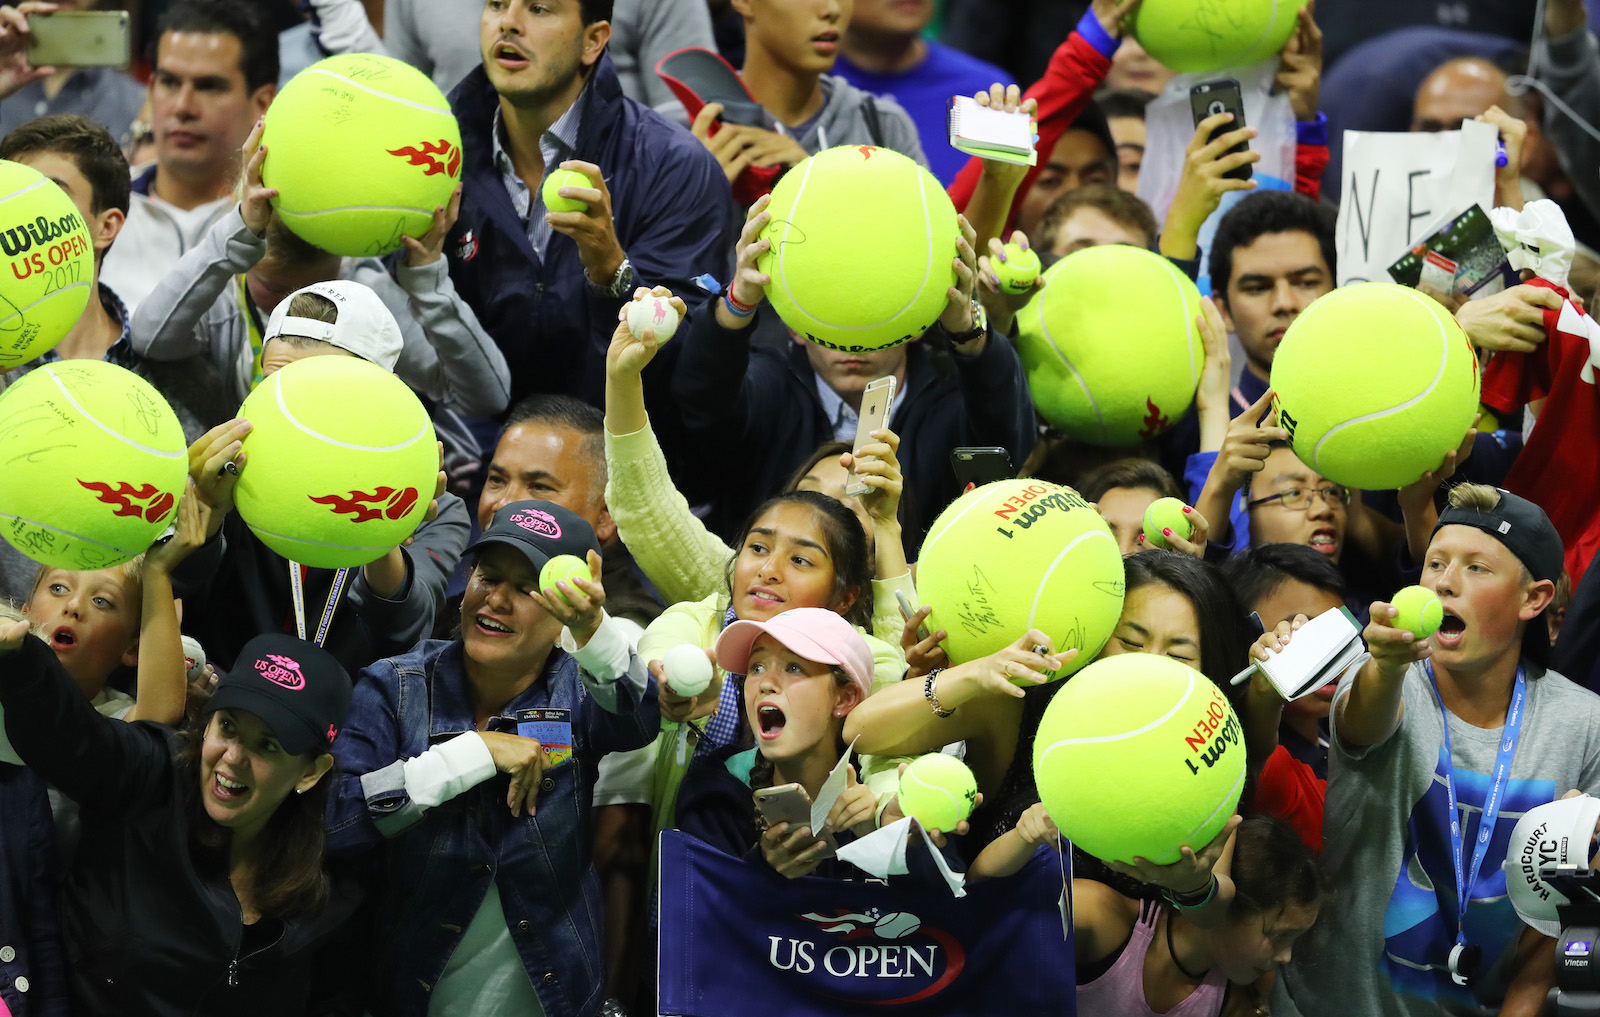 Collaborative Marketing: How the USTA leverages the US Open to Grow Participation